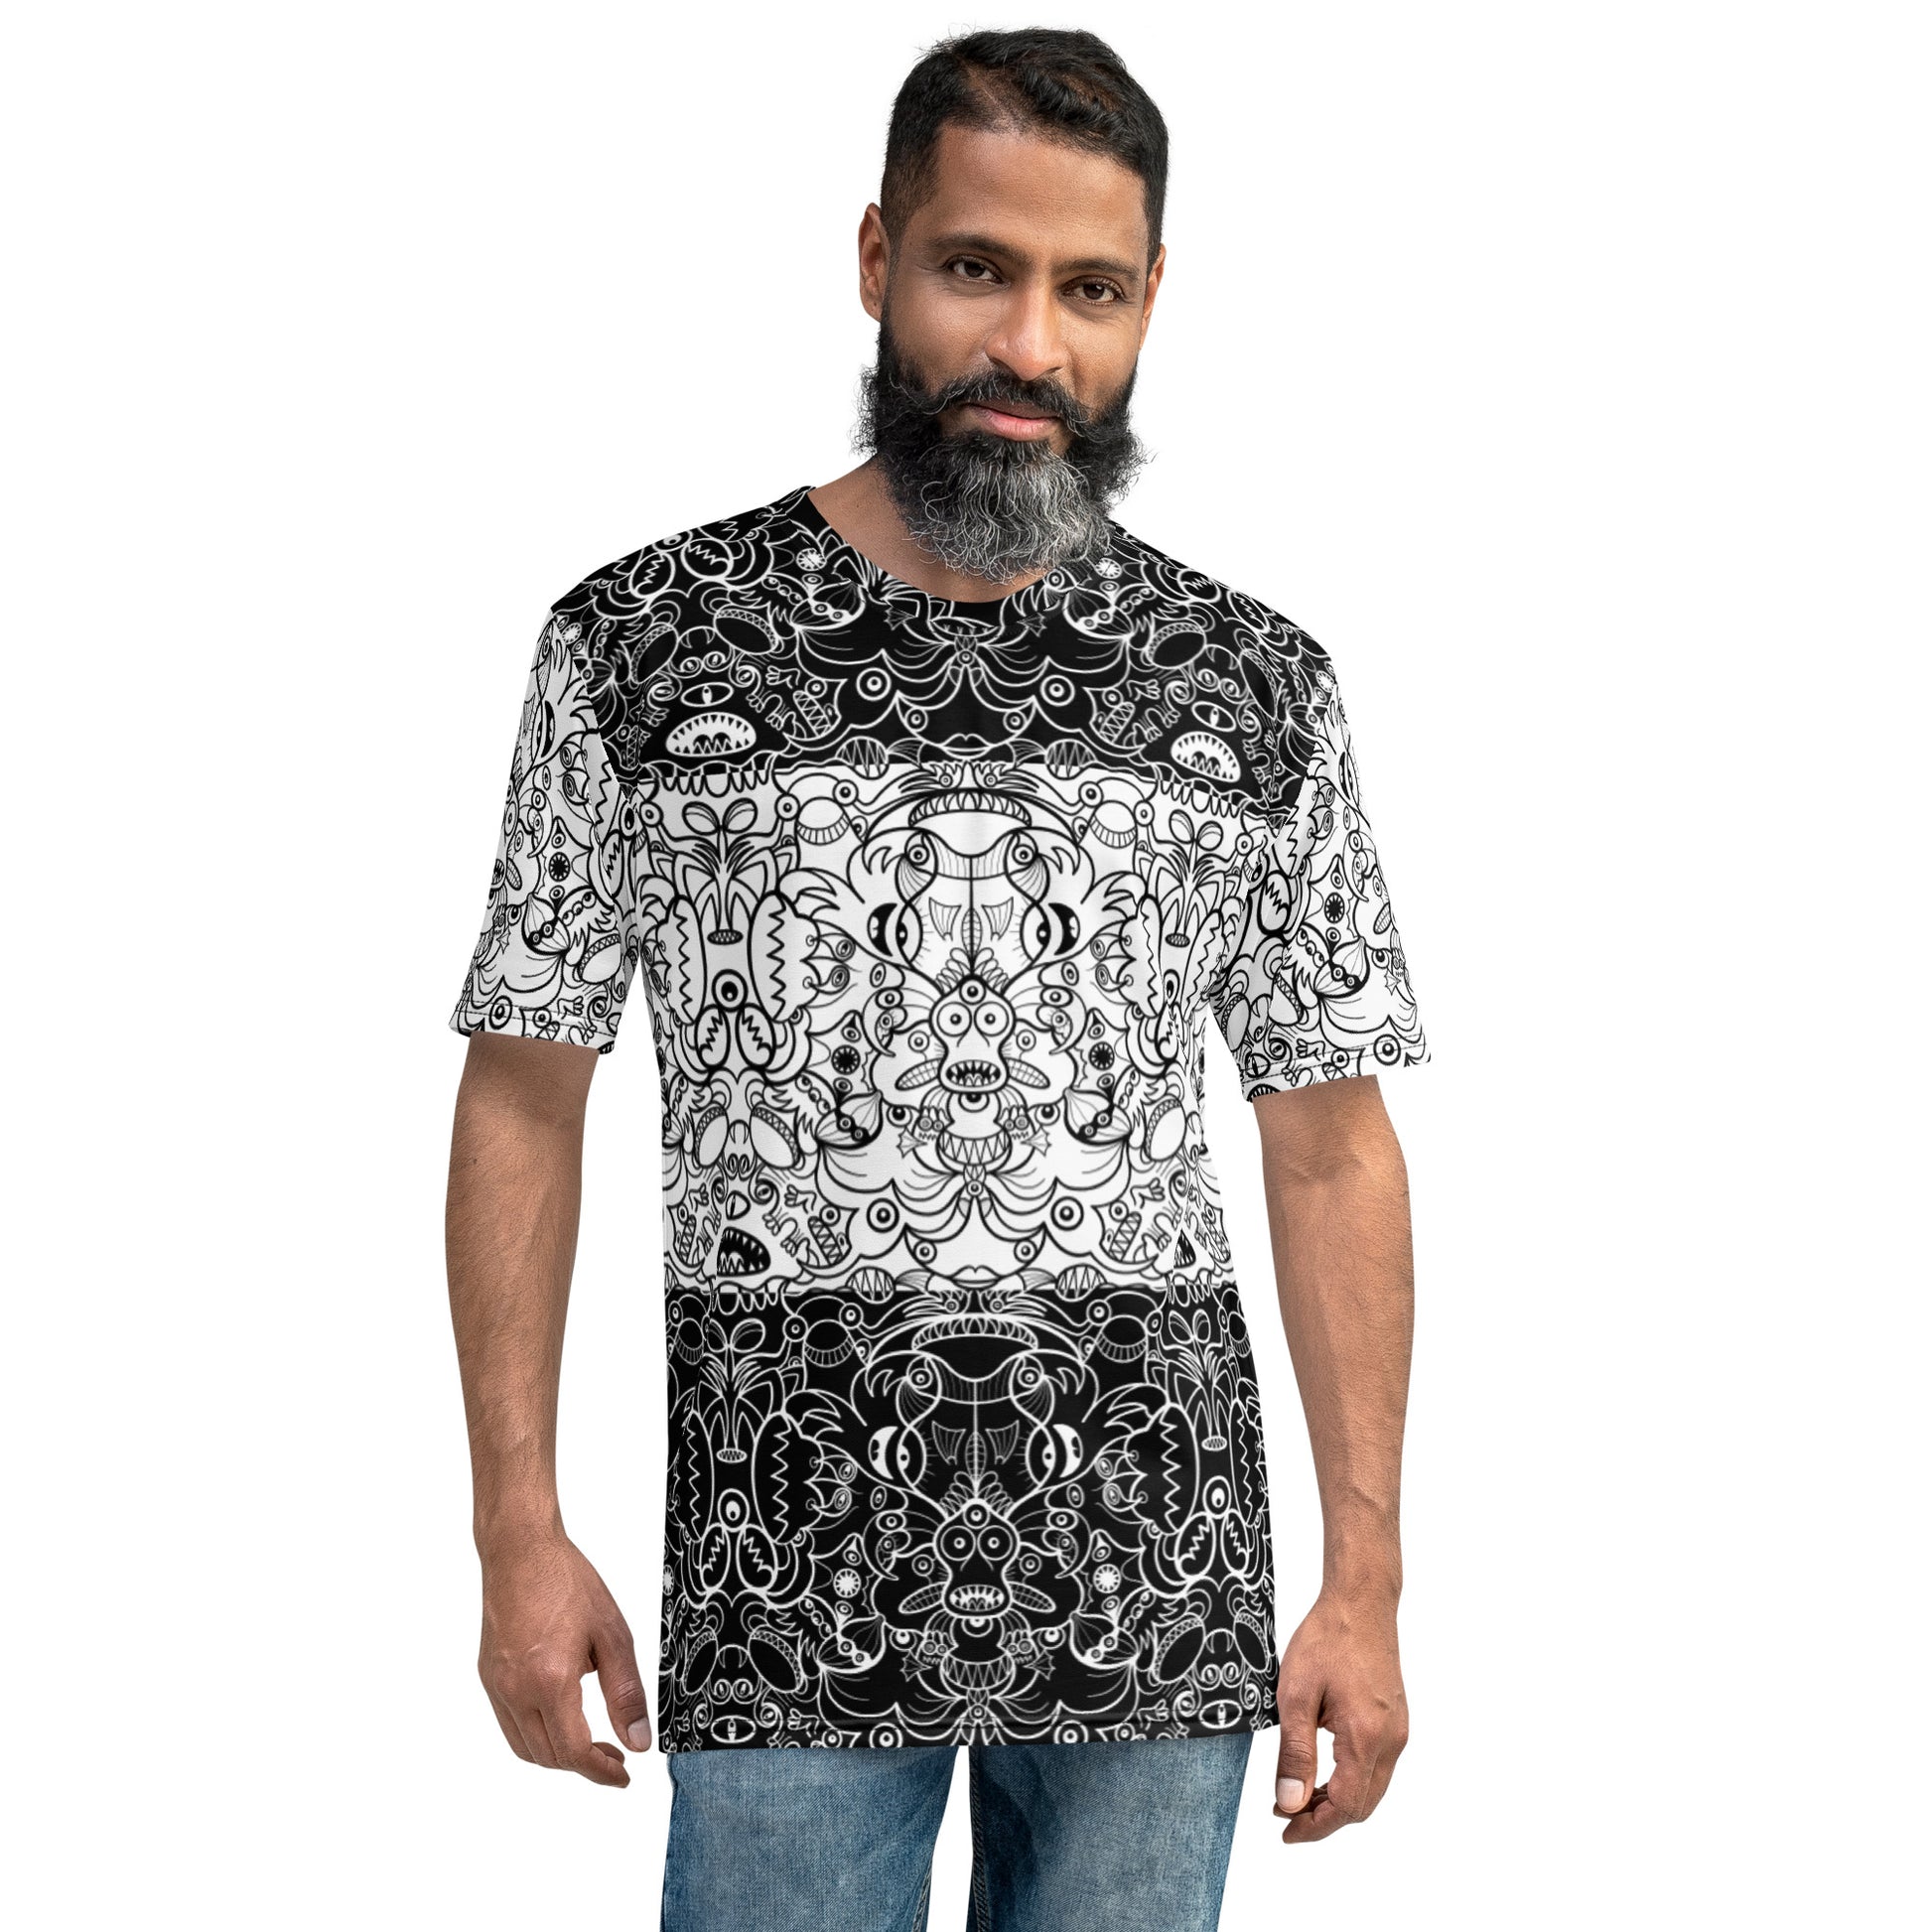 Black and white powerful Doodle world and vice versa Men's all over print t-shirt. Front view